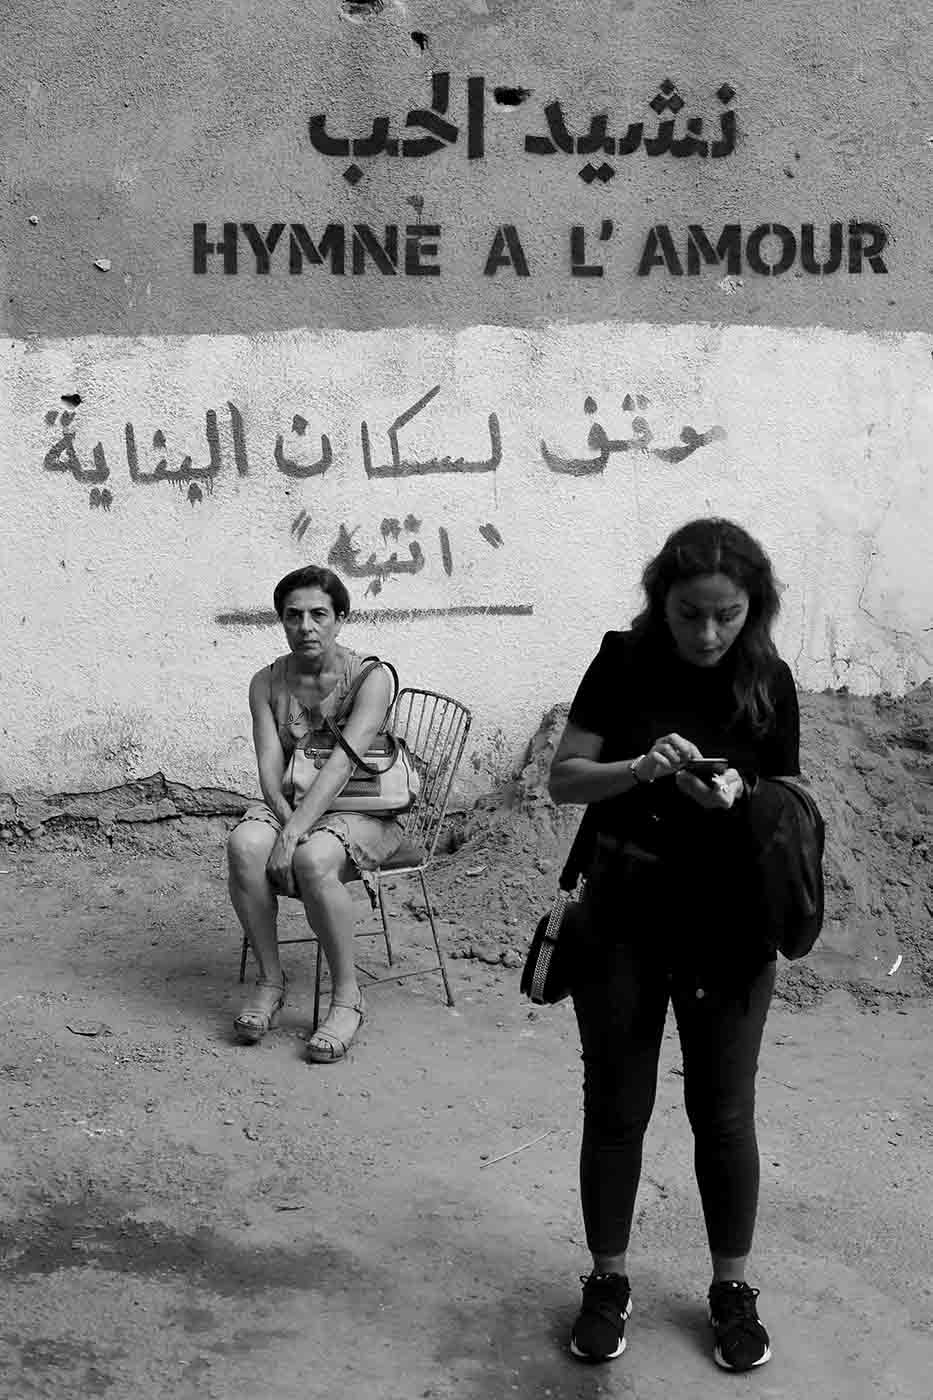 Opening of HYMNE A L'AMOUR - Photos by Marwan Tahtah